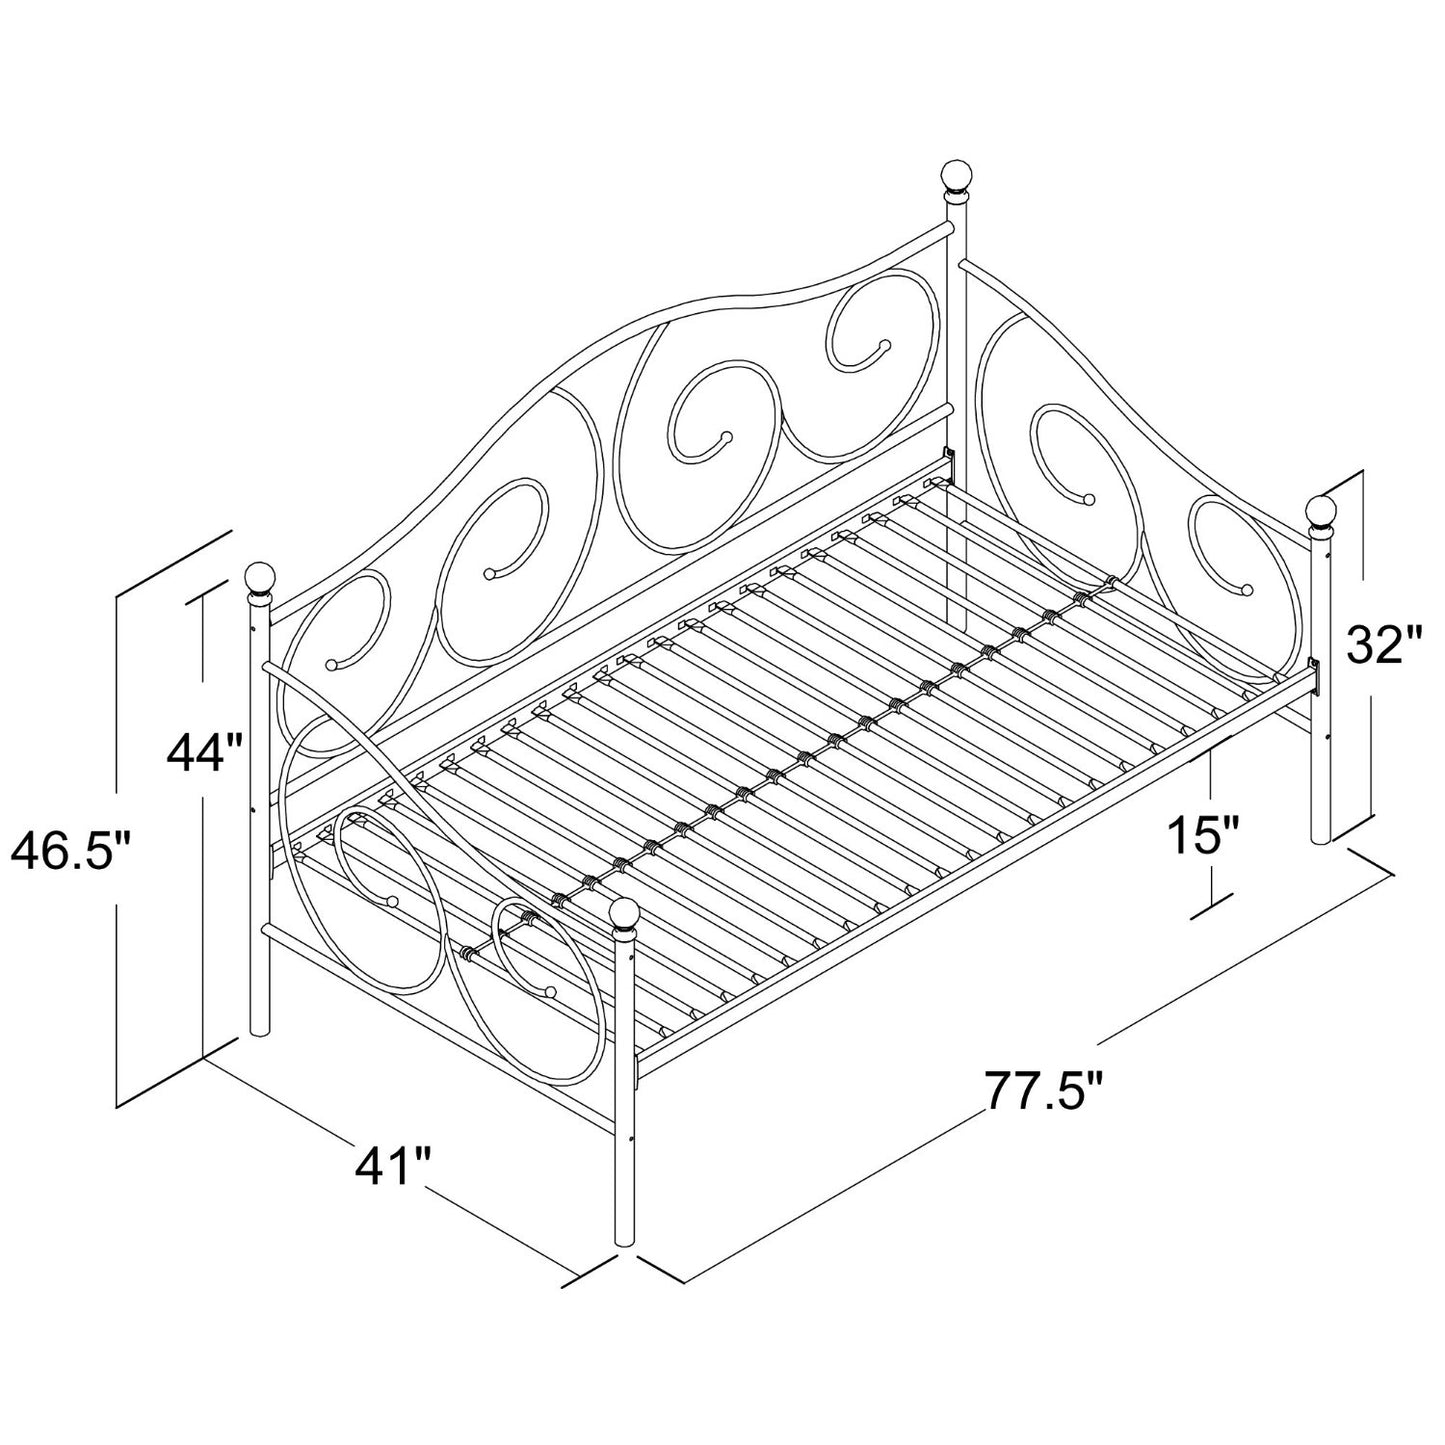 Twin size White Metal Day Bed Frame - 600 lb Weight Limit